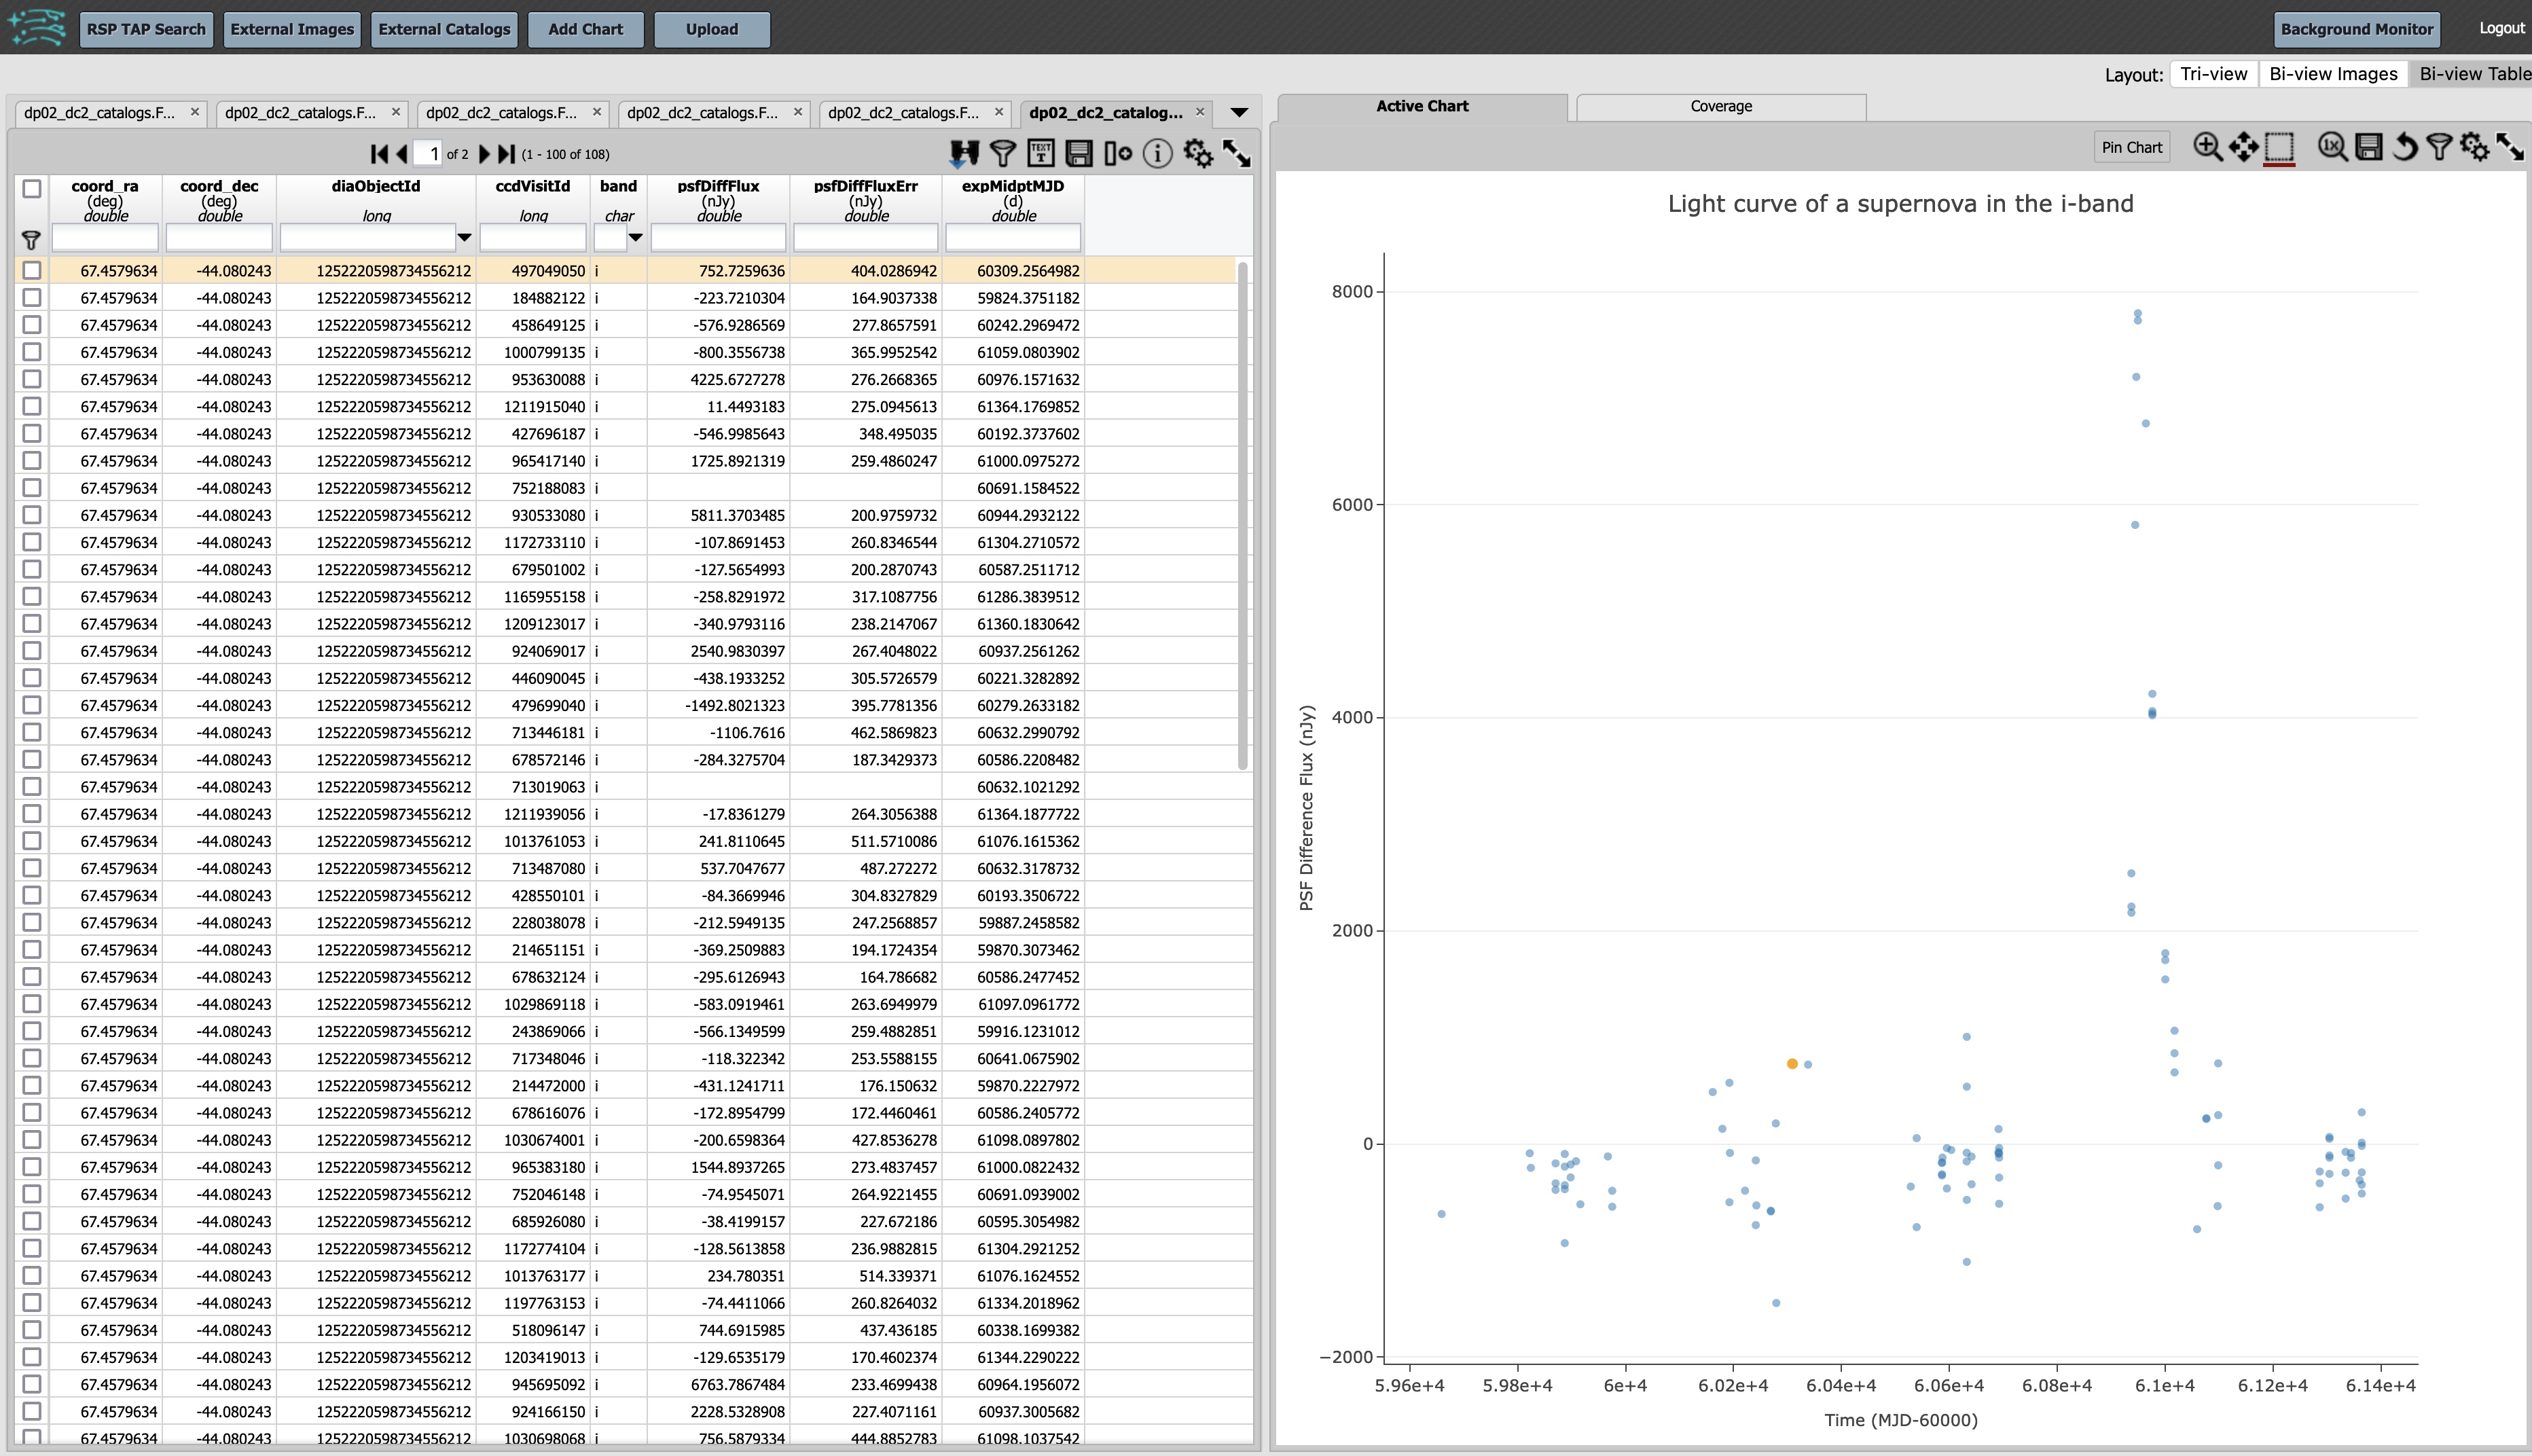 A screenshot of the results view showing only the table and the i-band lightcurve.